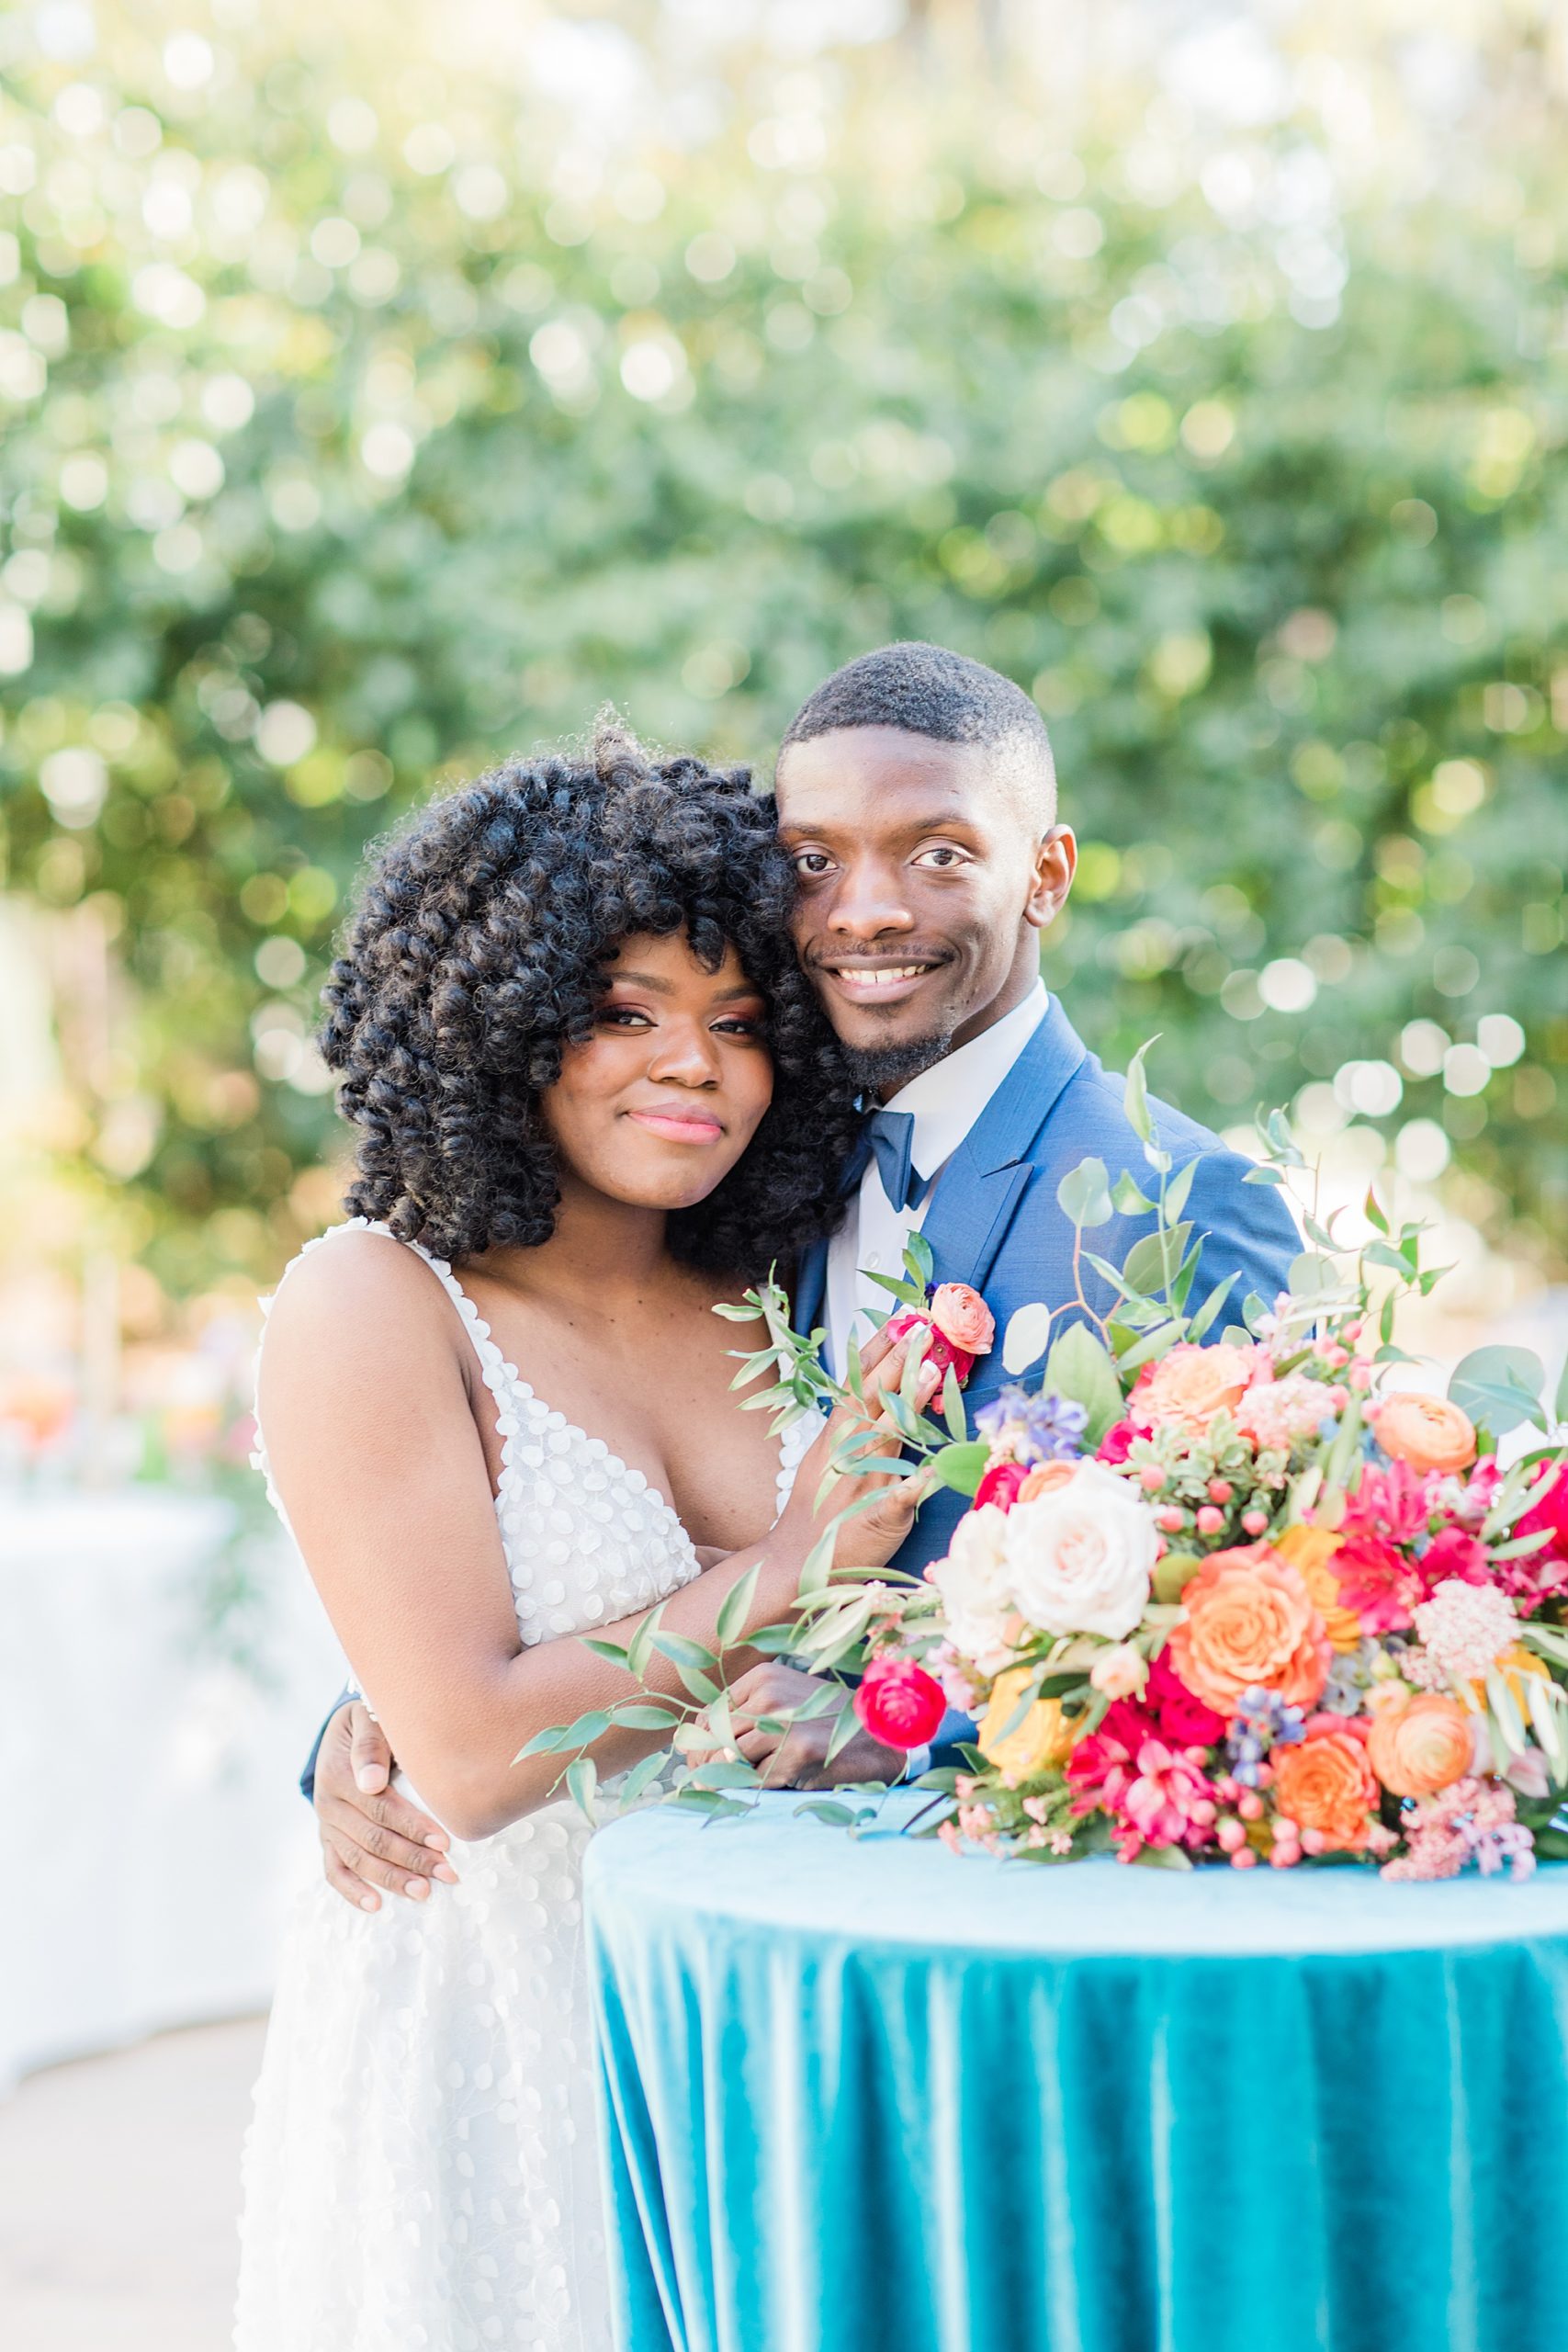 newlyweds hug by table with big colorful floral display